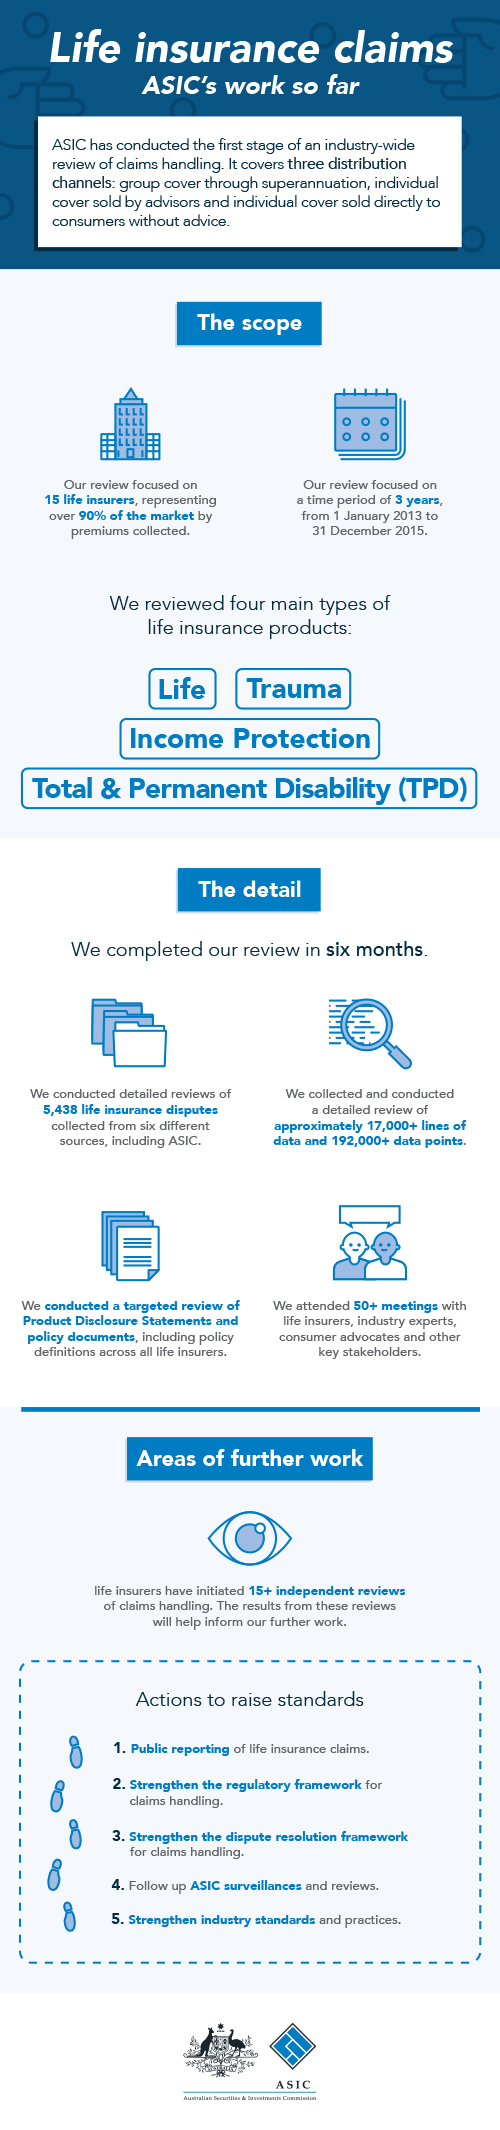 Life insurance claims - ASIC's work so far. ASIC has conducted the first stage of an industry-wide review of claims handling. It covers three distribution channels: group cover through superannuation, individual cover sold by advisors and individual cover sold directly to consumers without advice. The scope: Our review focused on 15 life insurers, representing over 90% of the market by premiums collected.Our review focused on a time period of 3 years, from 1 January 2013 to 31 December 2015. We reviewed four main types of life insurance products: Life, Trauma, Income Protection, Total and Permanent Disability. The detail: We completed our review in six months. We conducted detailed reviews of 5,438 life insurance disputes collected from six different sources, including ASIC. We collected and conducted a detailed review of approximately 17,000+ lines of data and 192,000+ data points.We conducted a targeted review of Product Disclosure Statements and policy documents, including policy definitions across all life insurers. We attended 50+ meetings with life insurers, industry experts, consumer advocates and other key stakeholders. Areas of further work: life insurers have initiated 15+ independent reviews of claims handling. The results from these reviews will help inform our further work. Actions to raise standards: 1. Public reporting of life insurance claims. 2. Strengthen the regulatory framework for claims handling. 3. Strengthen the dispute resolution framework for claims handling. 4. Follow up ASIC surveillances and reviews. 5. Strengthen industry standards and practices.